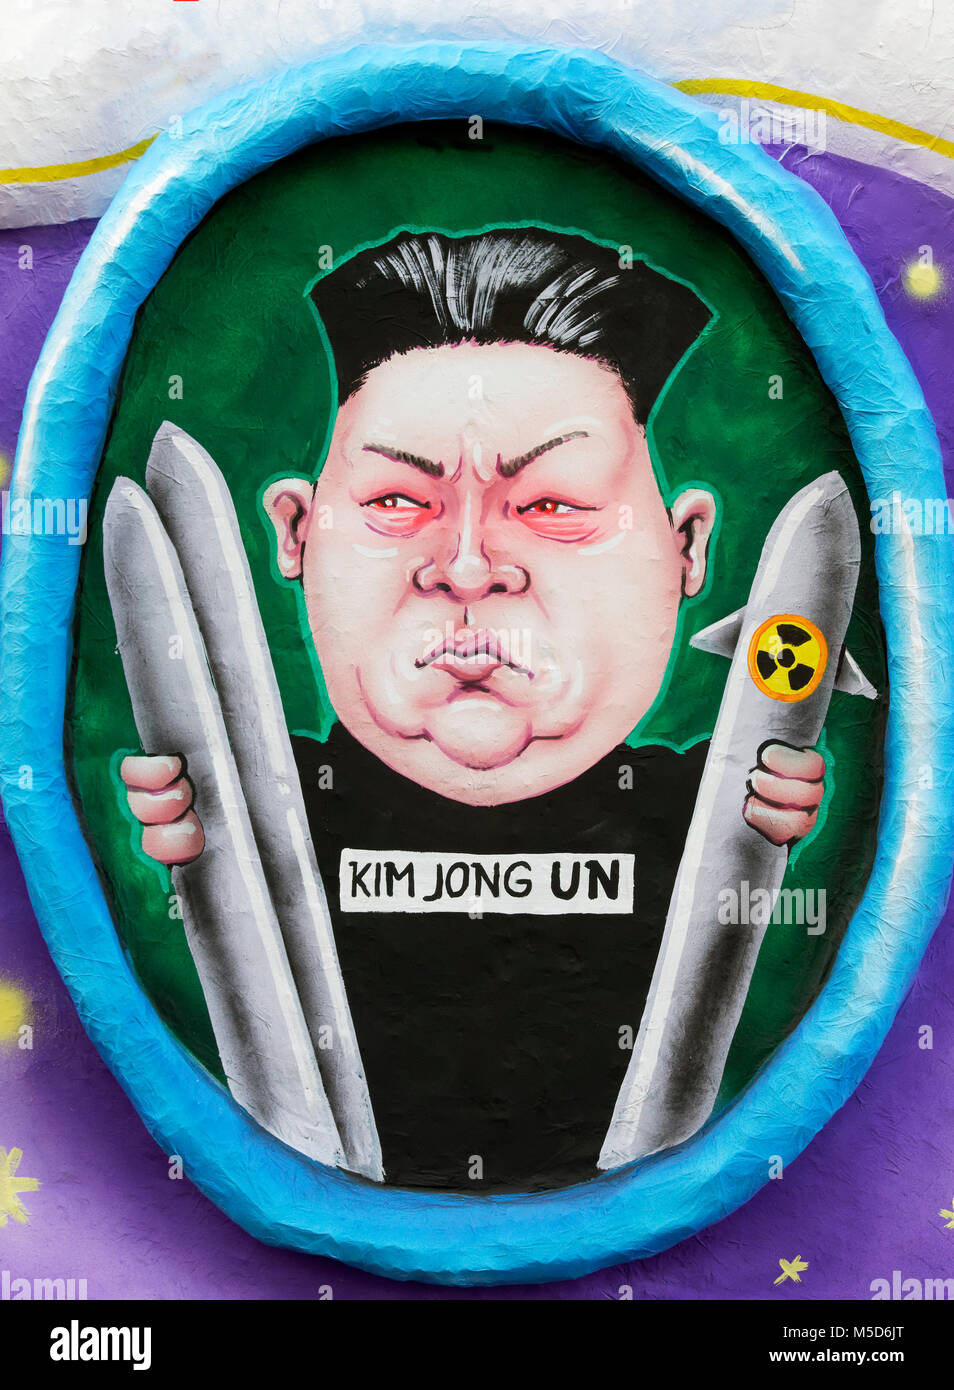 North Vietnamese President Kim Jong-un holds nuclear missile, political caricature, motto caravan during Carnival Monday Stock Photo